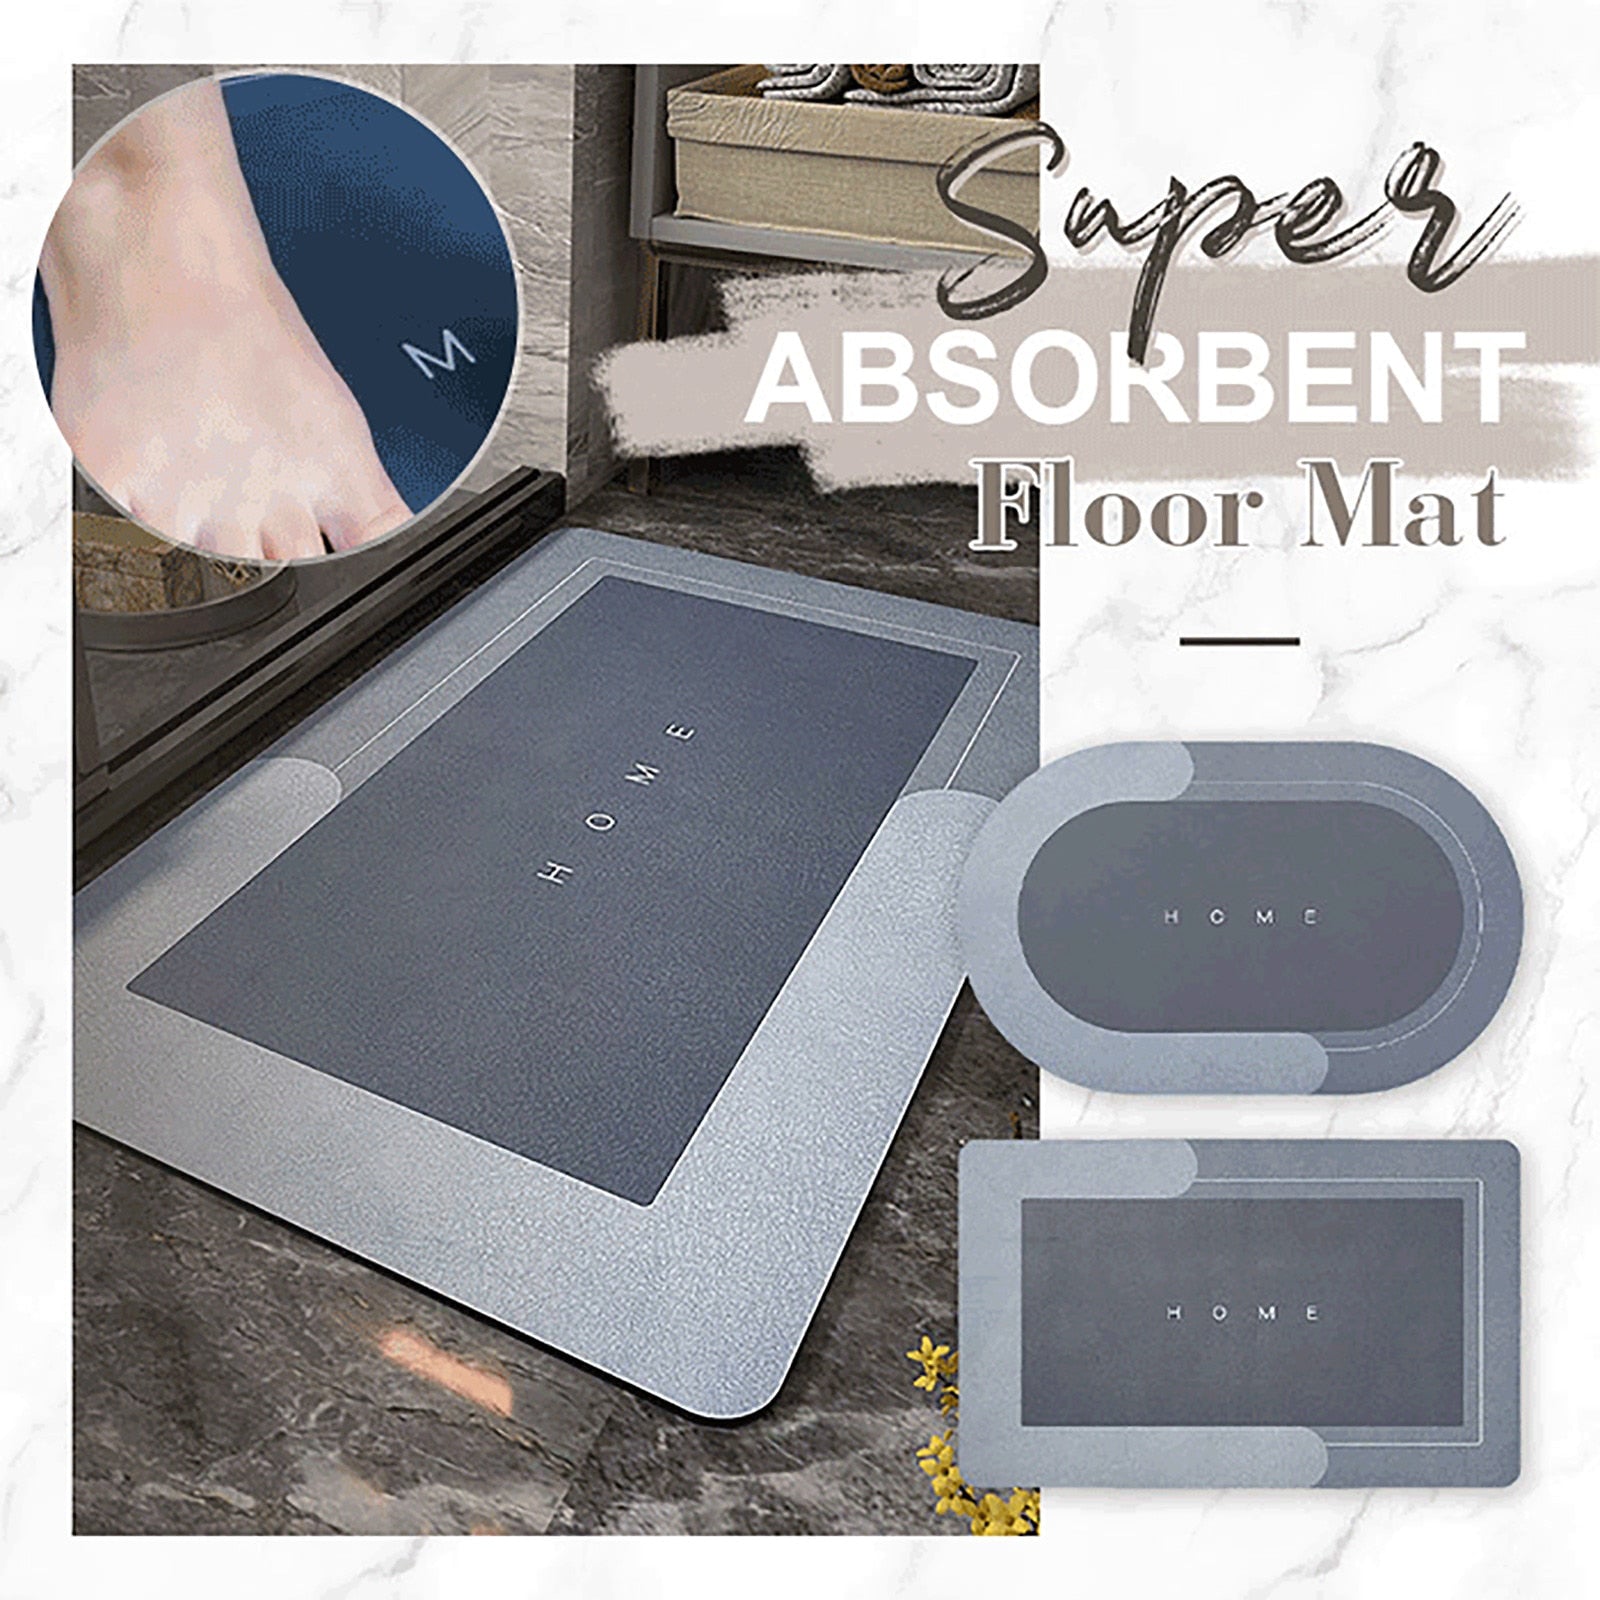 <a href='/access-floor/'>Access Floor</a>ing Suppliers | Access Floors (Page 1) to Slip resistant flooring (Page 1)